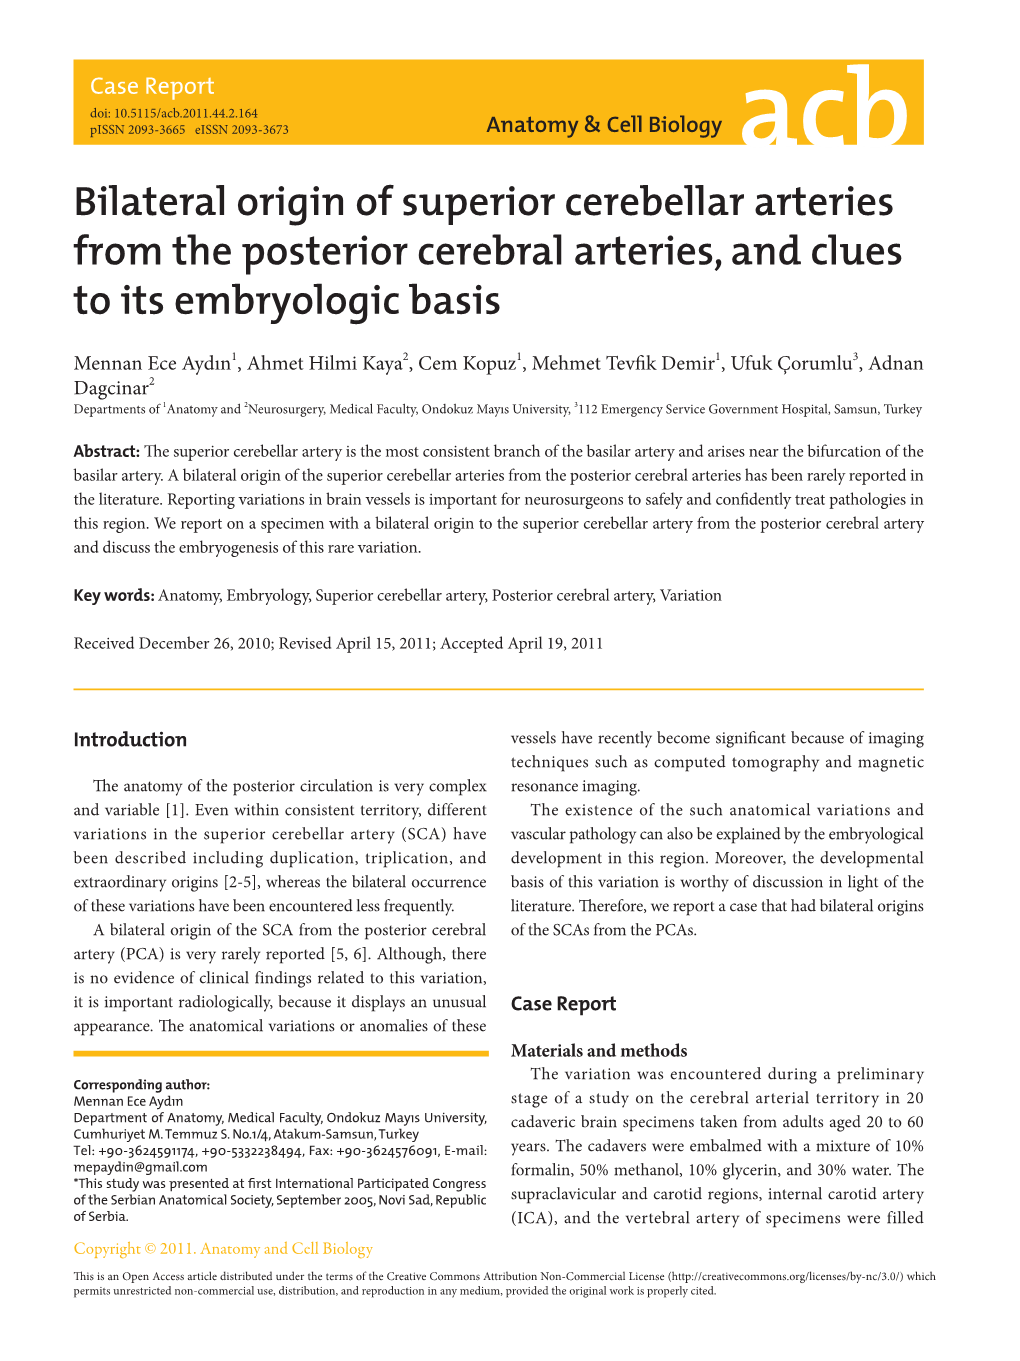 Bilateral Origin of Superior Cerebellar Arteries from the Posterior Cerebral Arteries, and Clues to Its Embryologic Basis